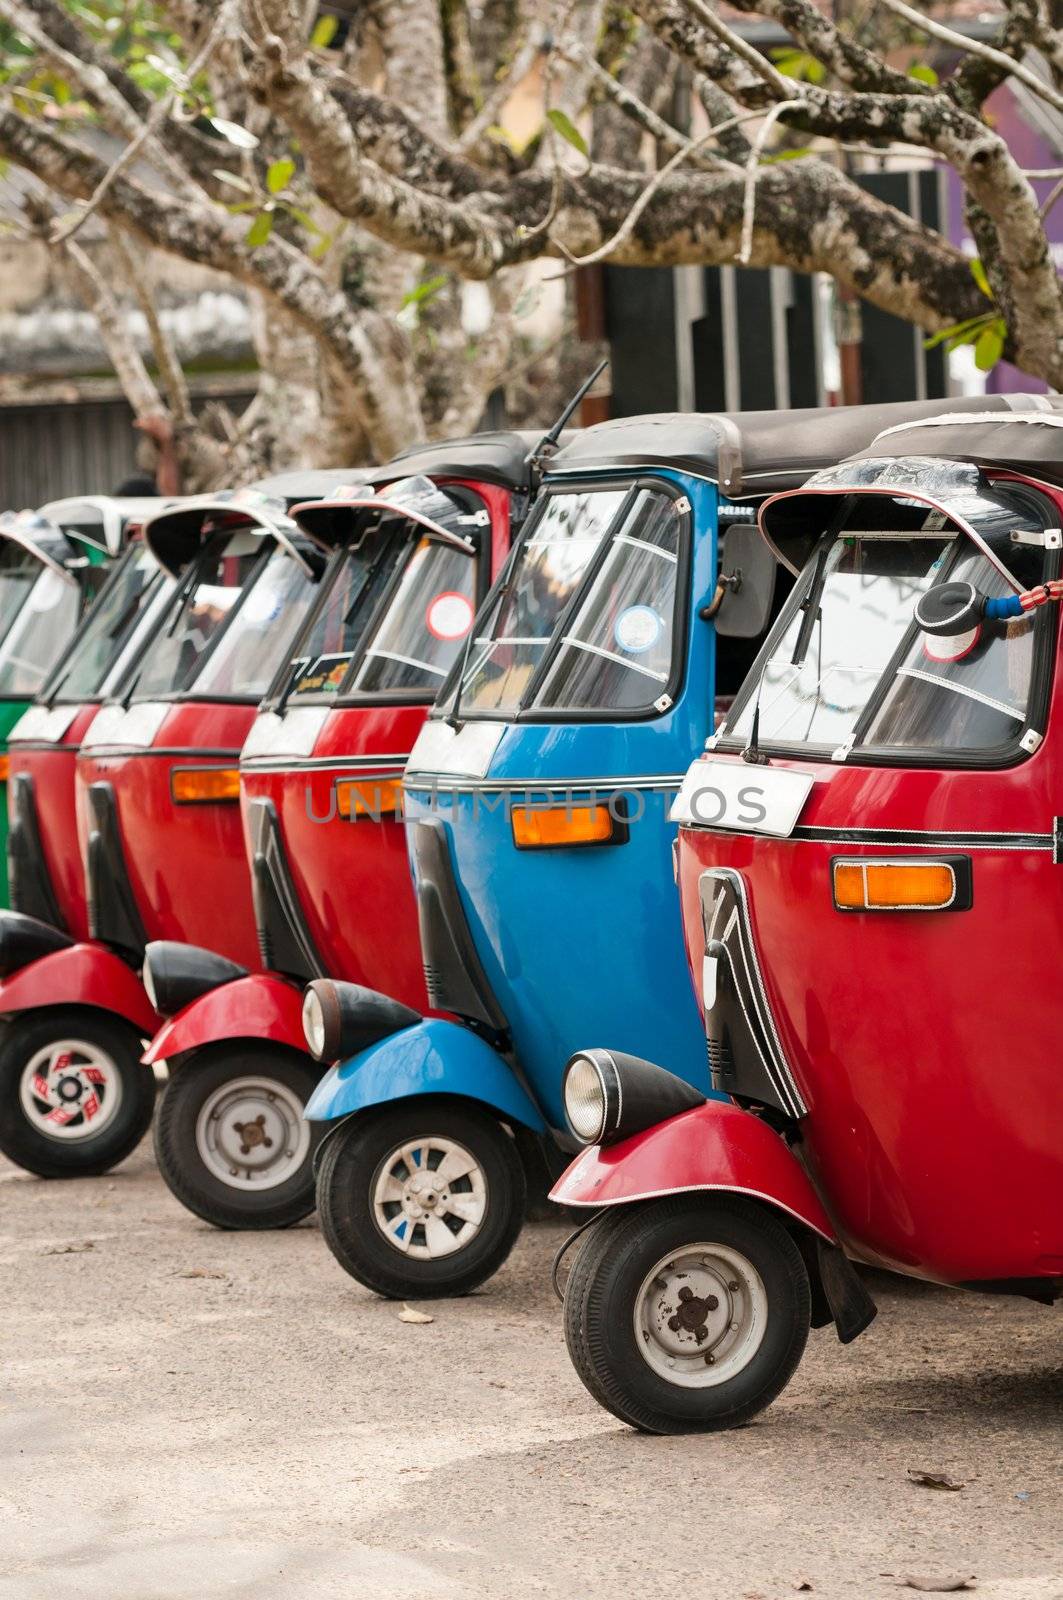 Tuk-tuk is the most popular transport type on Asian streets.  .